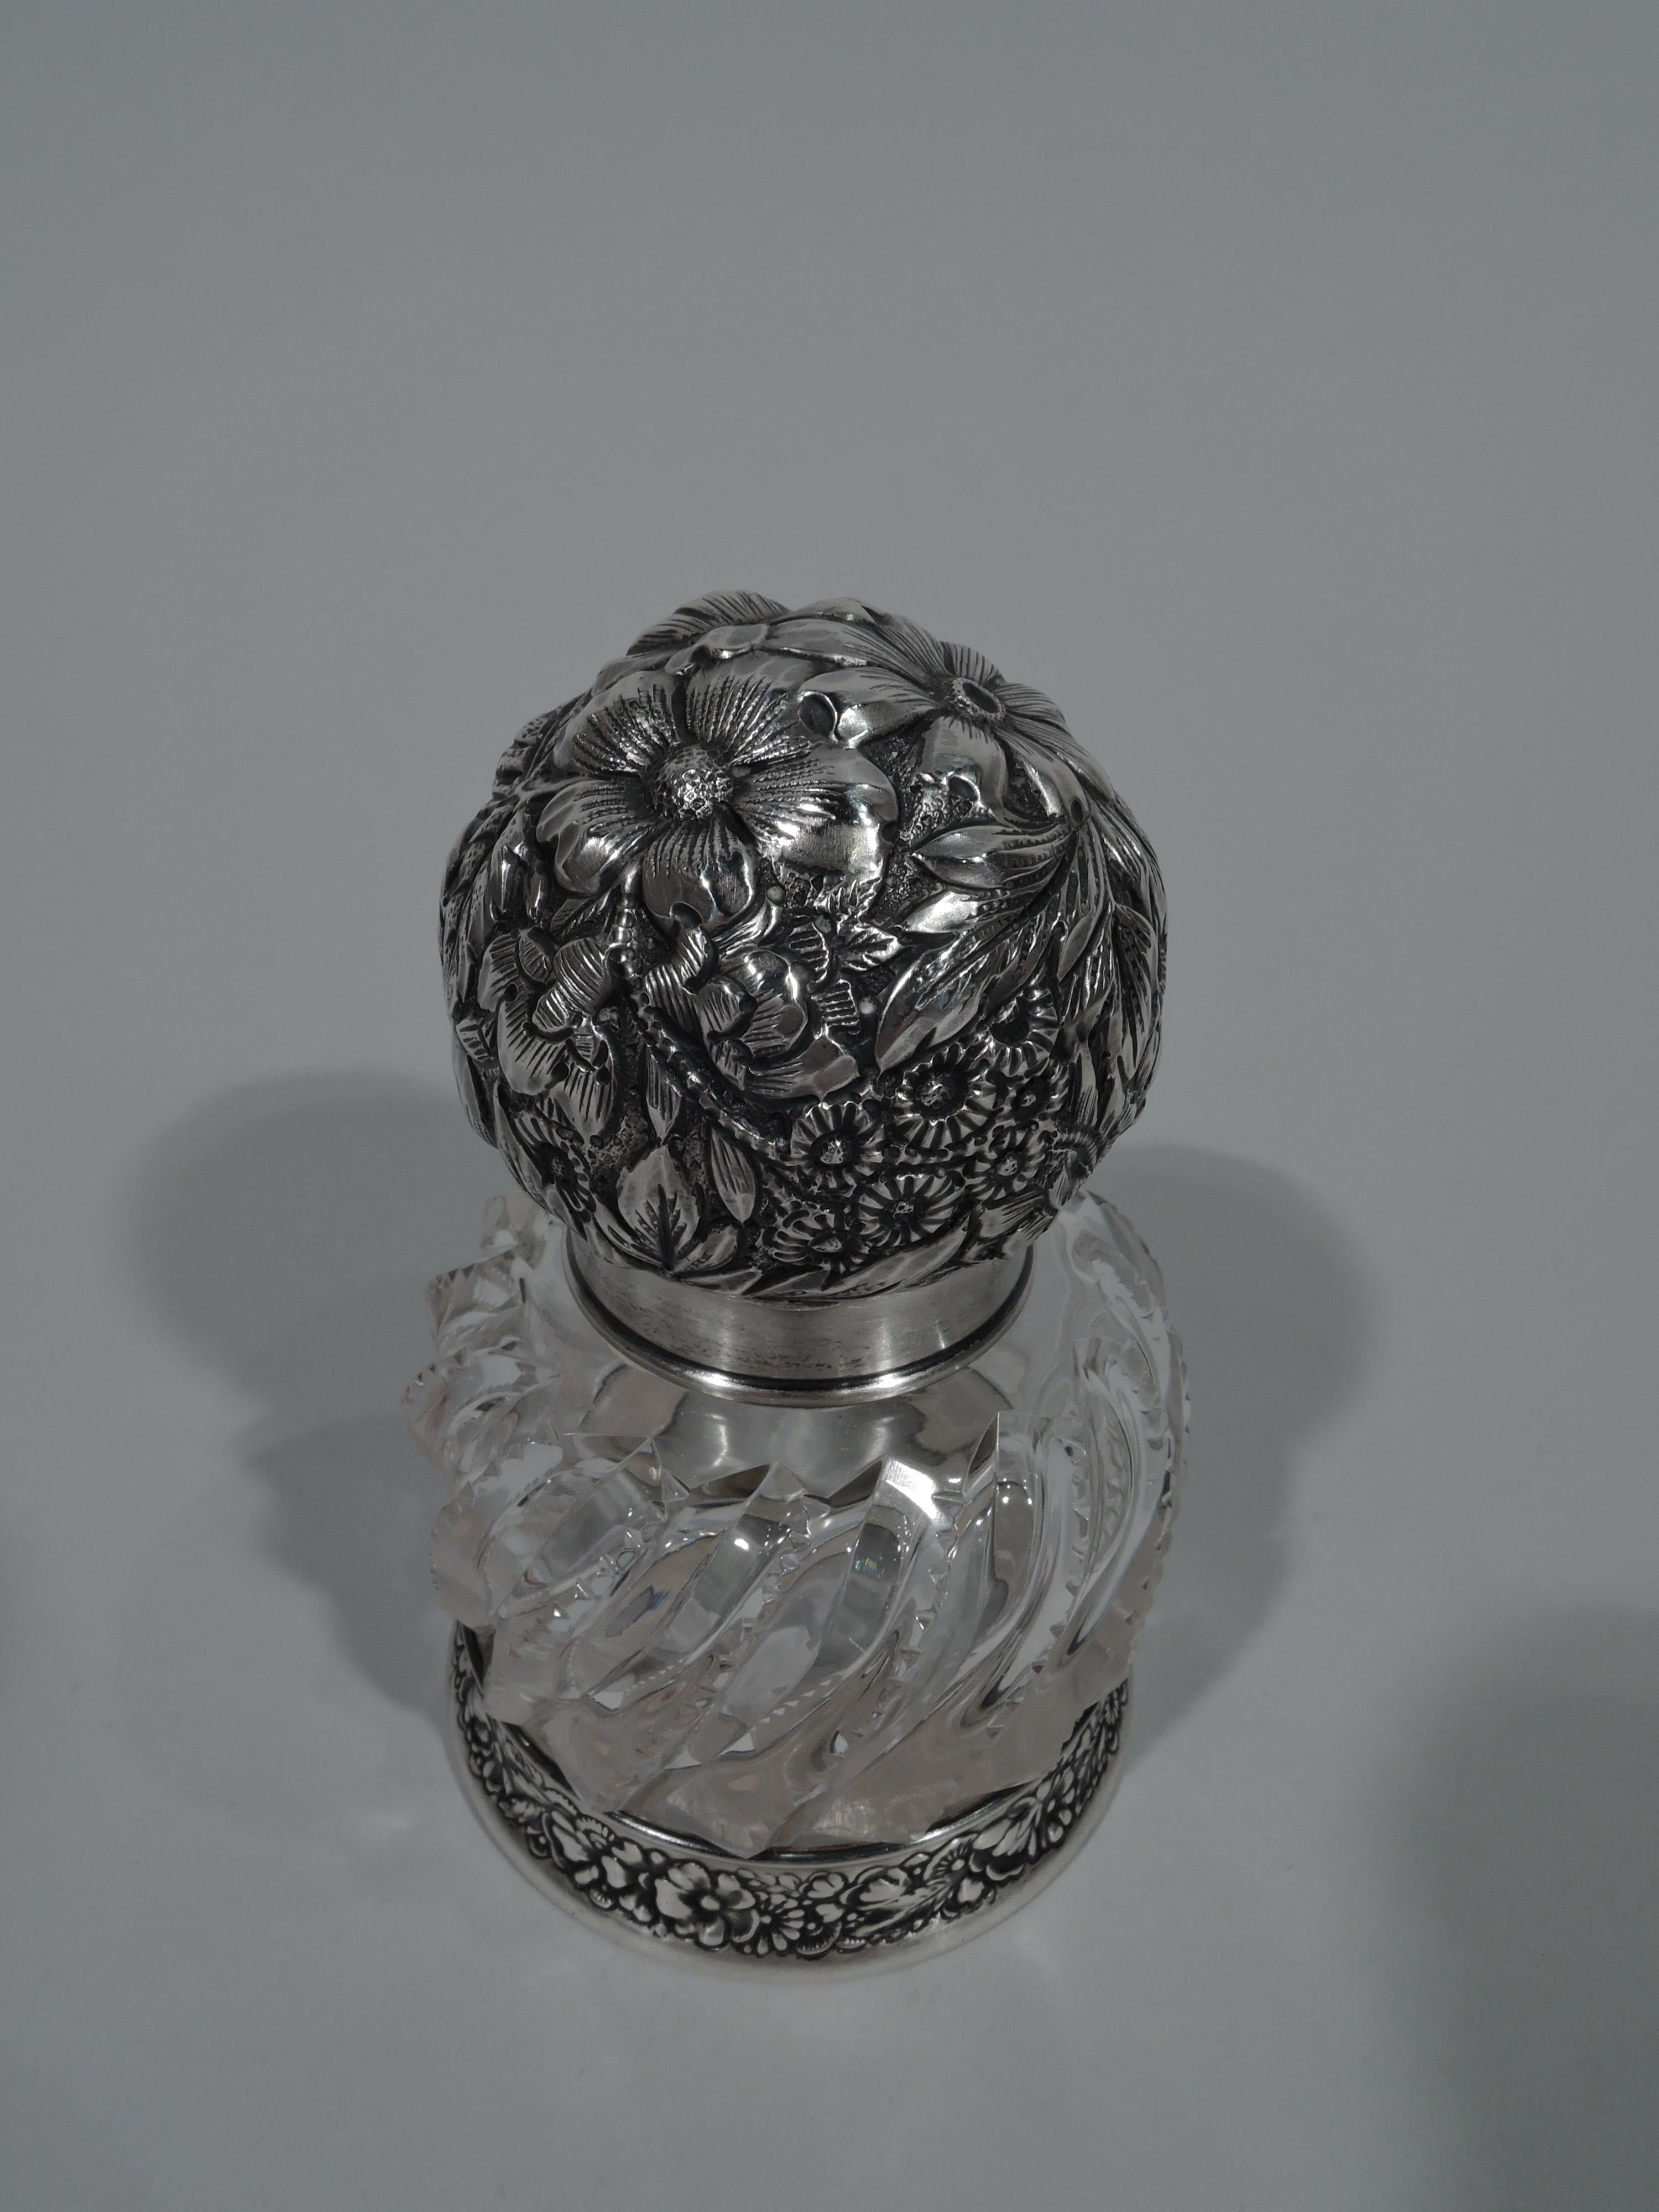 Victorian sterling silver and glass inkwell. Made by Gorham in Providence in 1889. Drum form with curved shoulder and zipper-cut twisted flutes. Short neck with sterling silver collar and hinged ball cover with allover floral repousse. Sterling